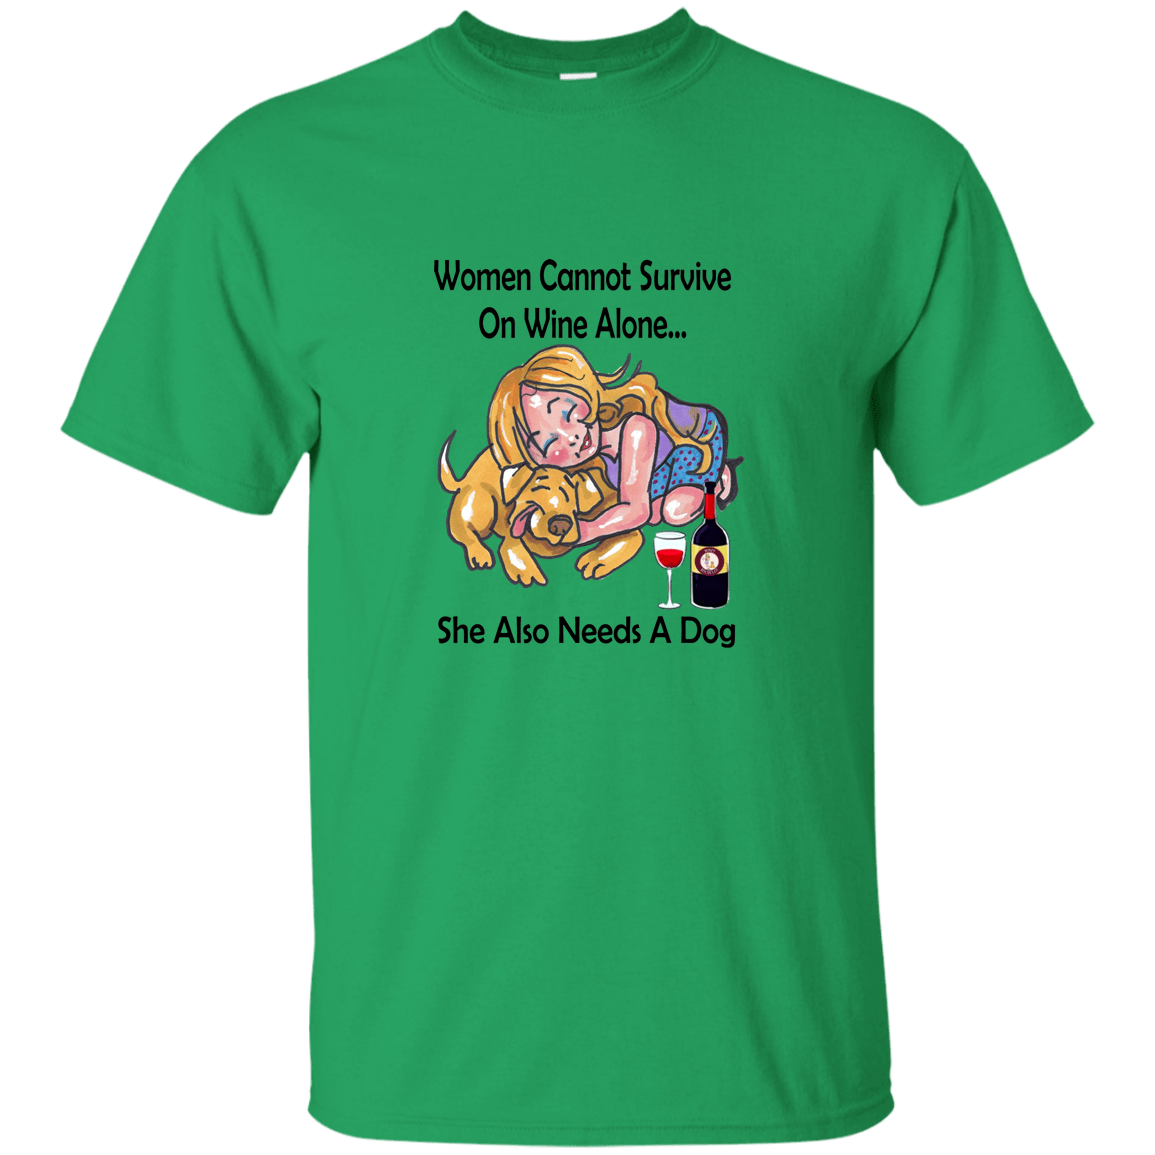 T-Shirts Irish Green / S WineyBitches.co "Women Cannot Survive On Wine Alone..." Blk Lettering T-Shirt WineyBitchesCo